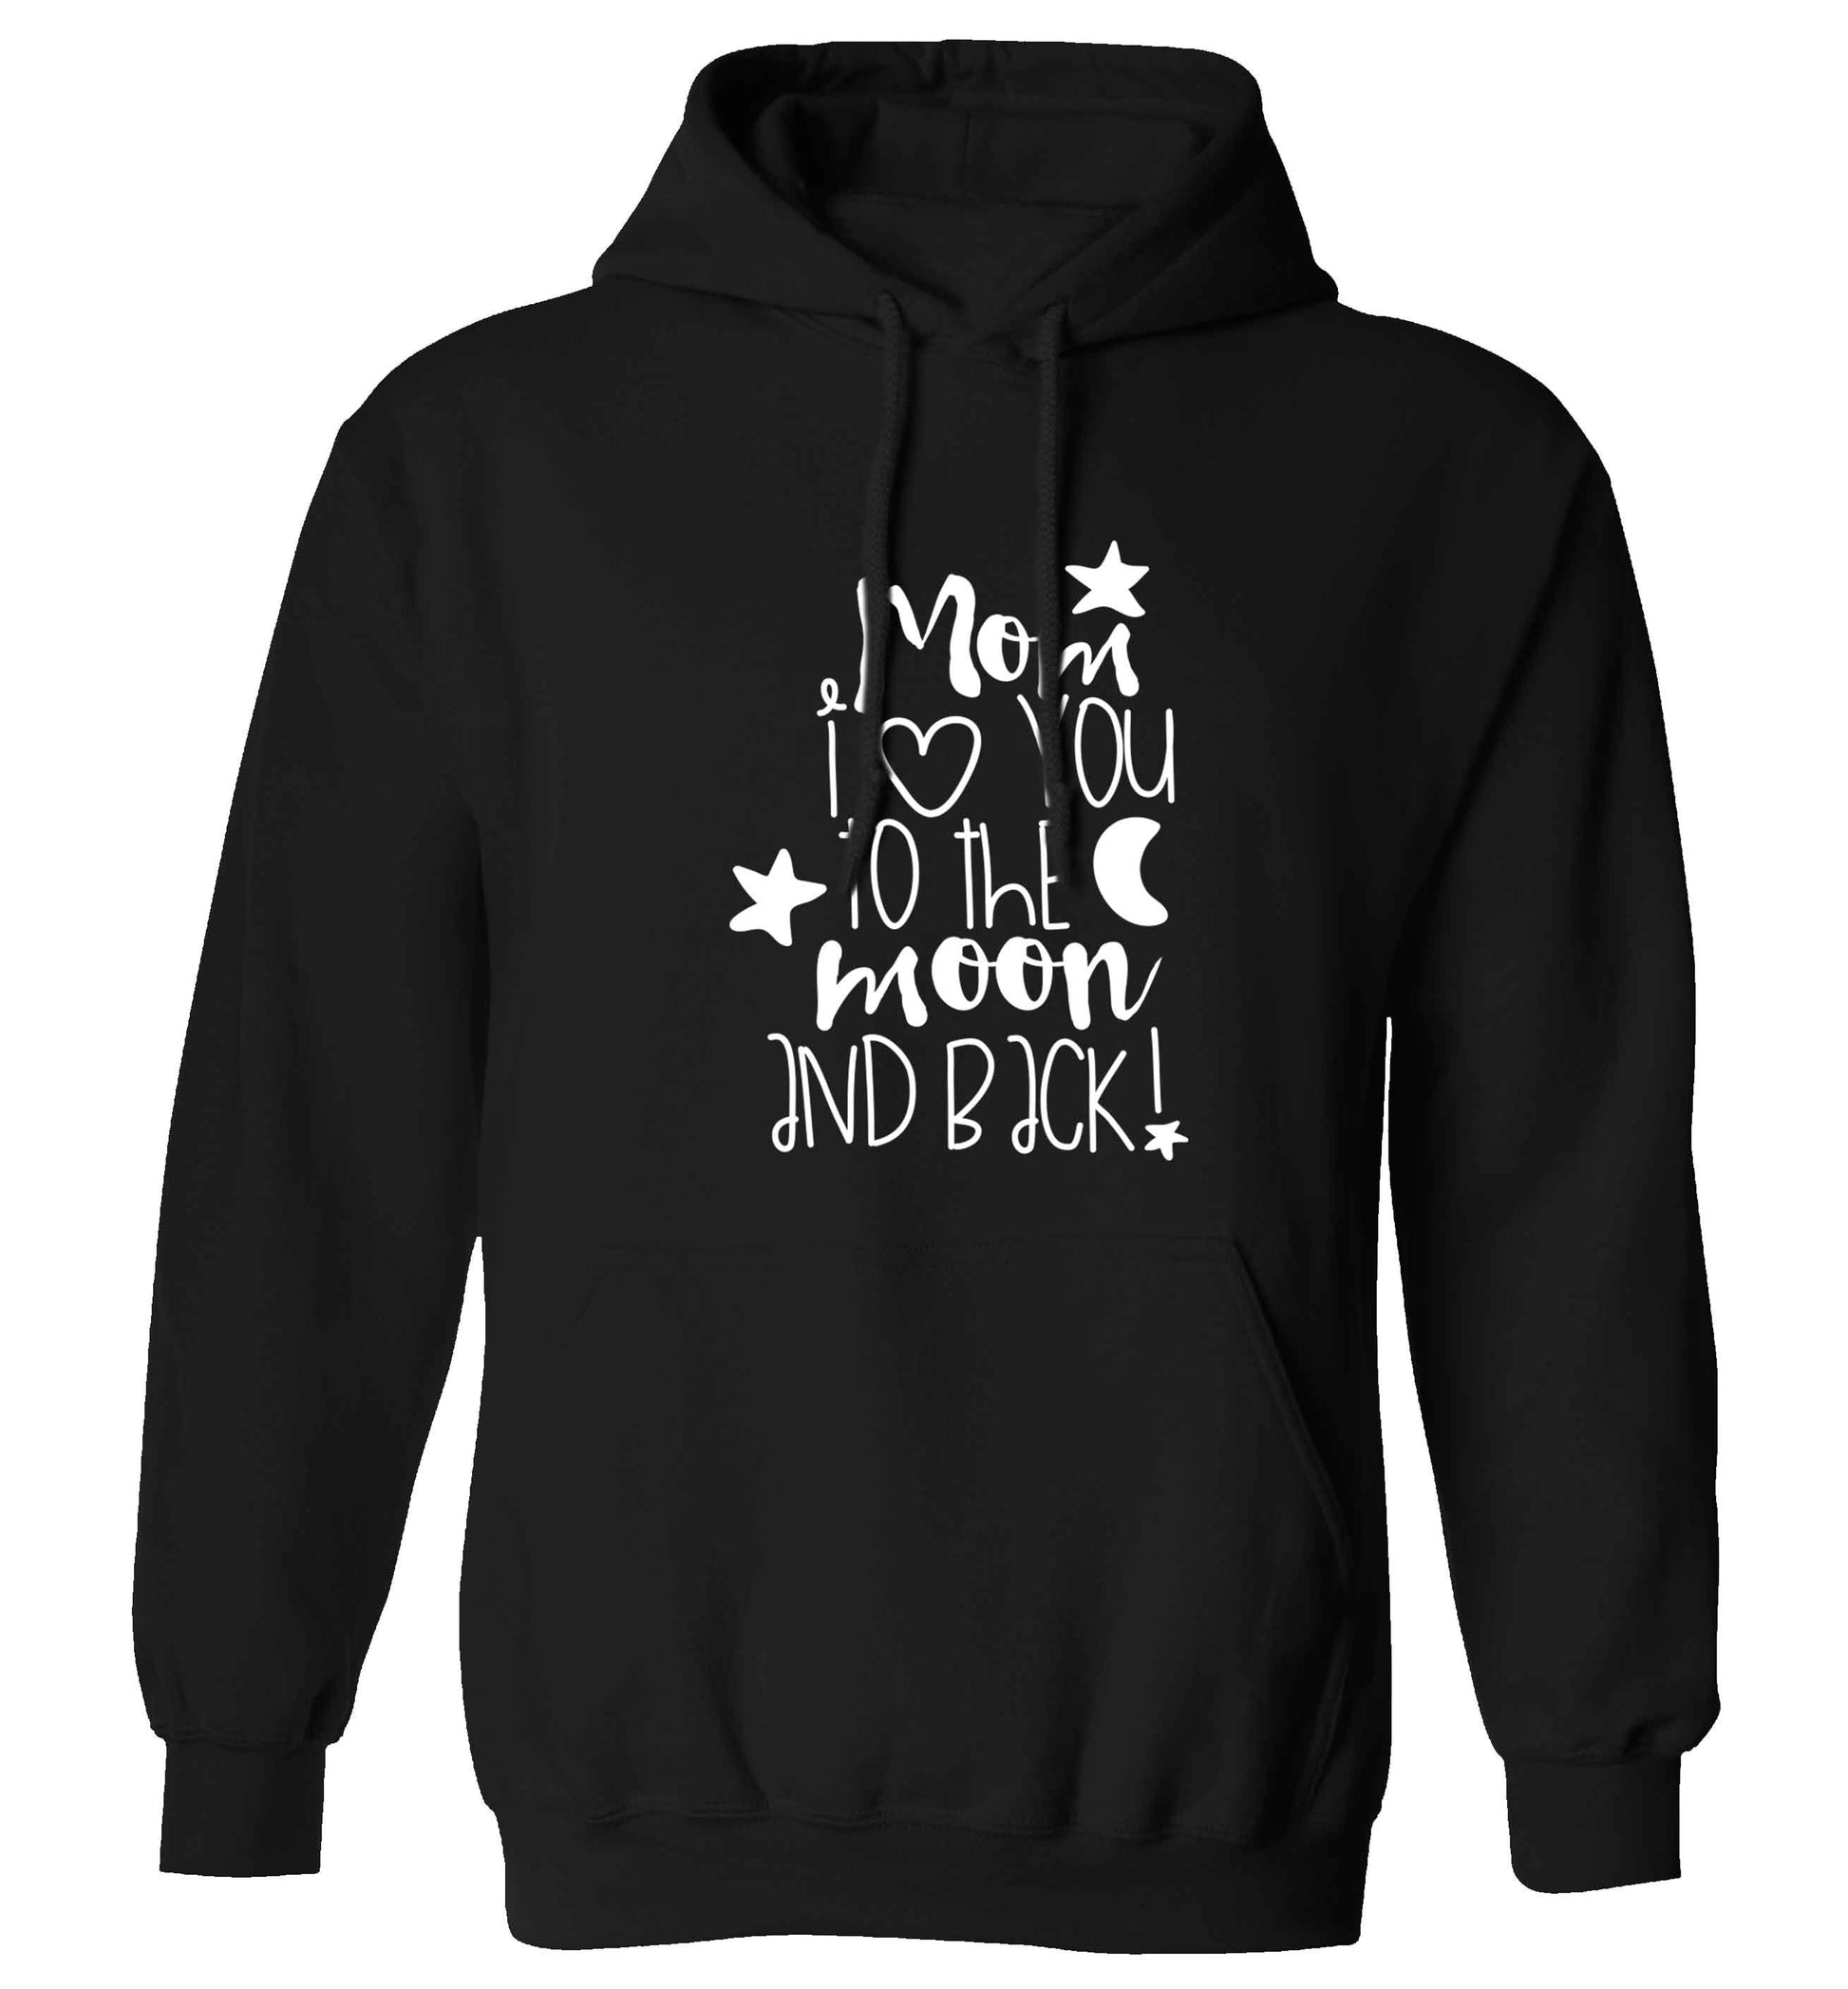 Mom I love you to the moon and back adults unisex black hoodie 2XL